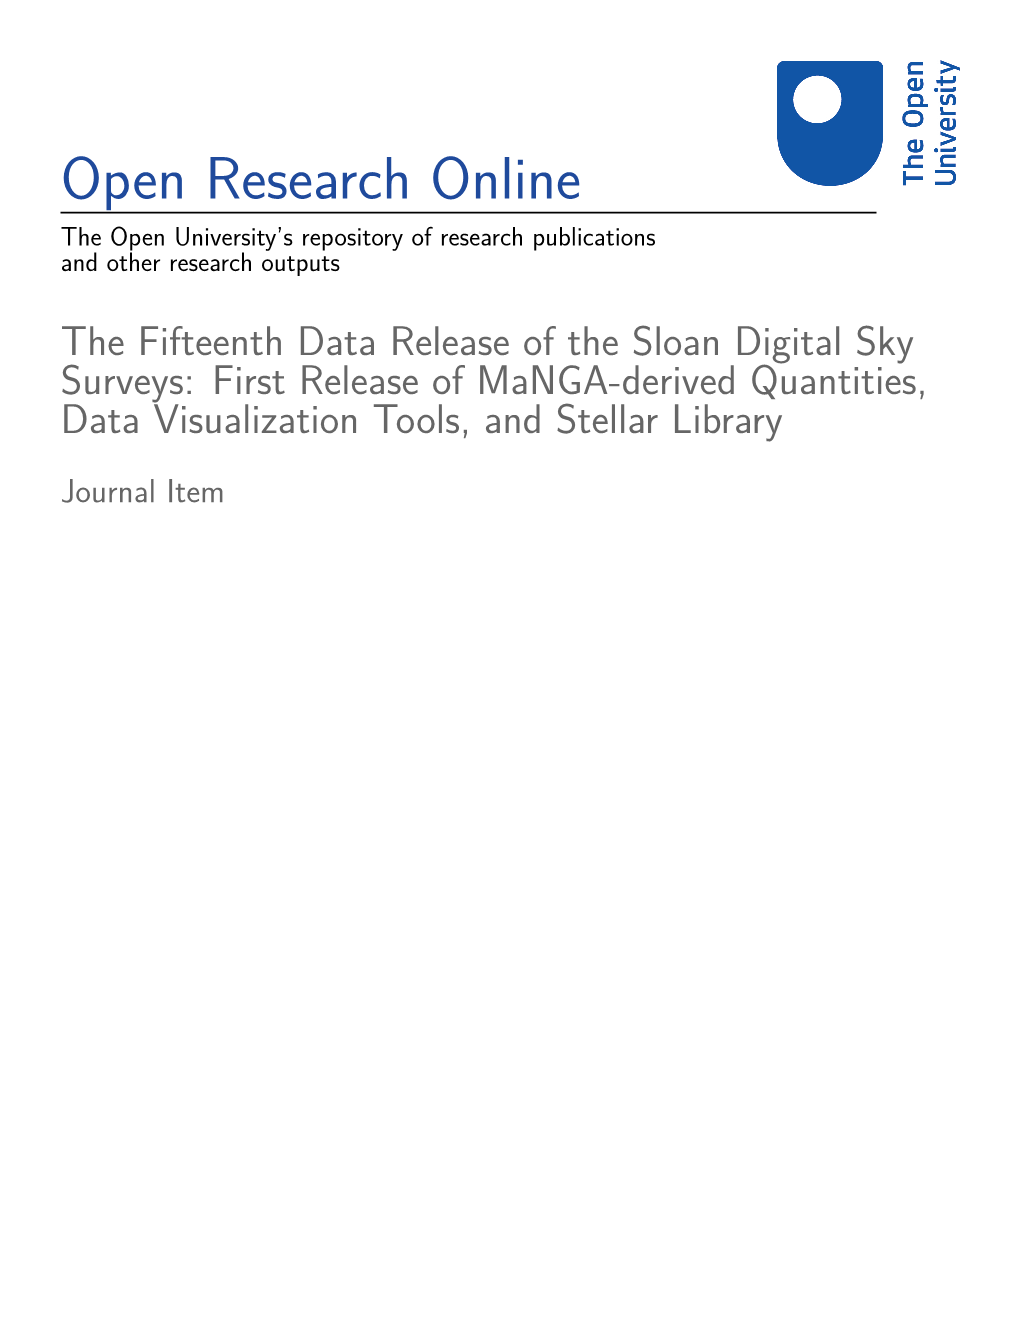 The Fifteenth Data Release of the Sloan Digital Sky Surveys: First Release of Manga-Derived Quantities, Data Visualization Tools, and Stellar Library